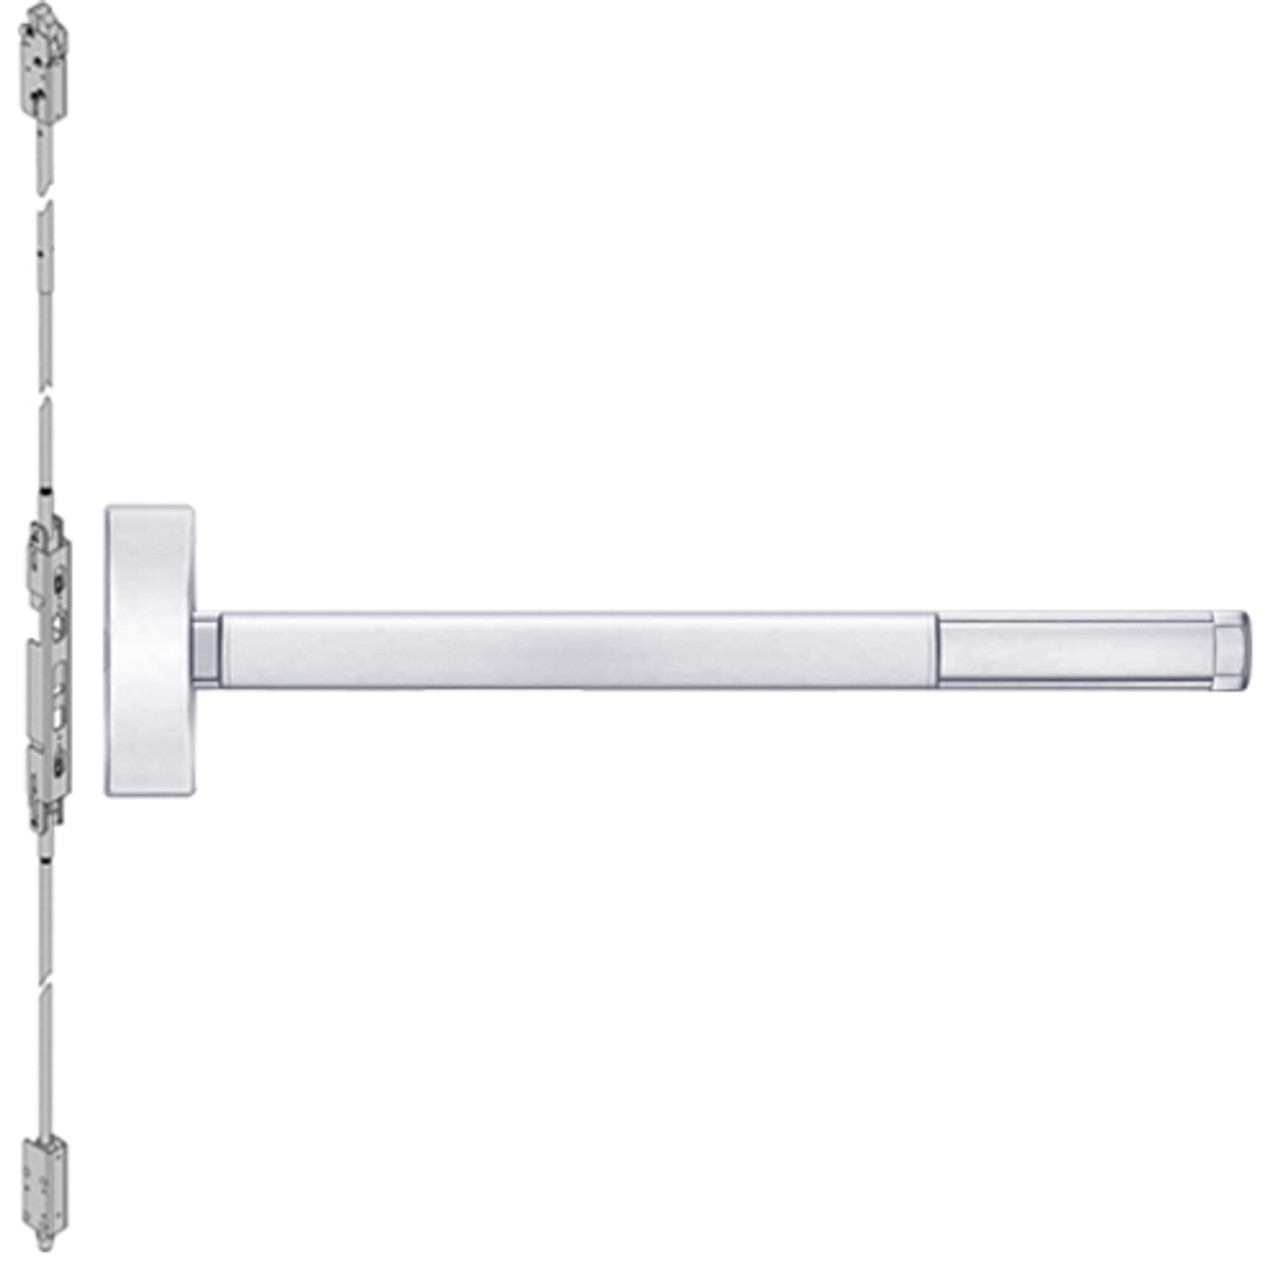 ELRFL2808LBR-625-48 PHI 2800 Series Fire Rated Concealed Vertical Rod Exit Device with Electric Latch Retraction Prepped for Key Controls Lever-Knob in Bright Chrome Finish